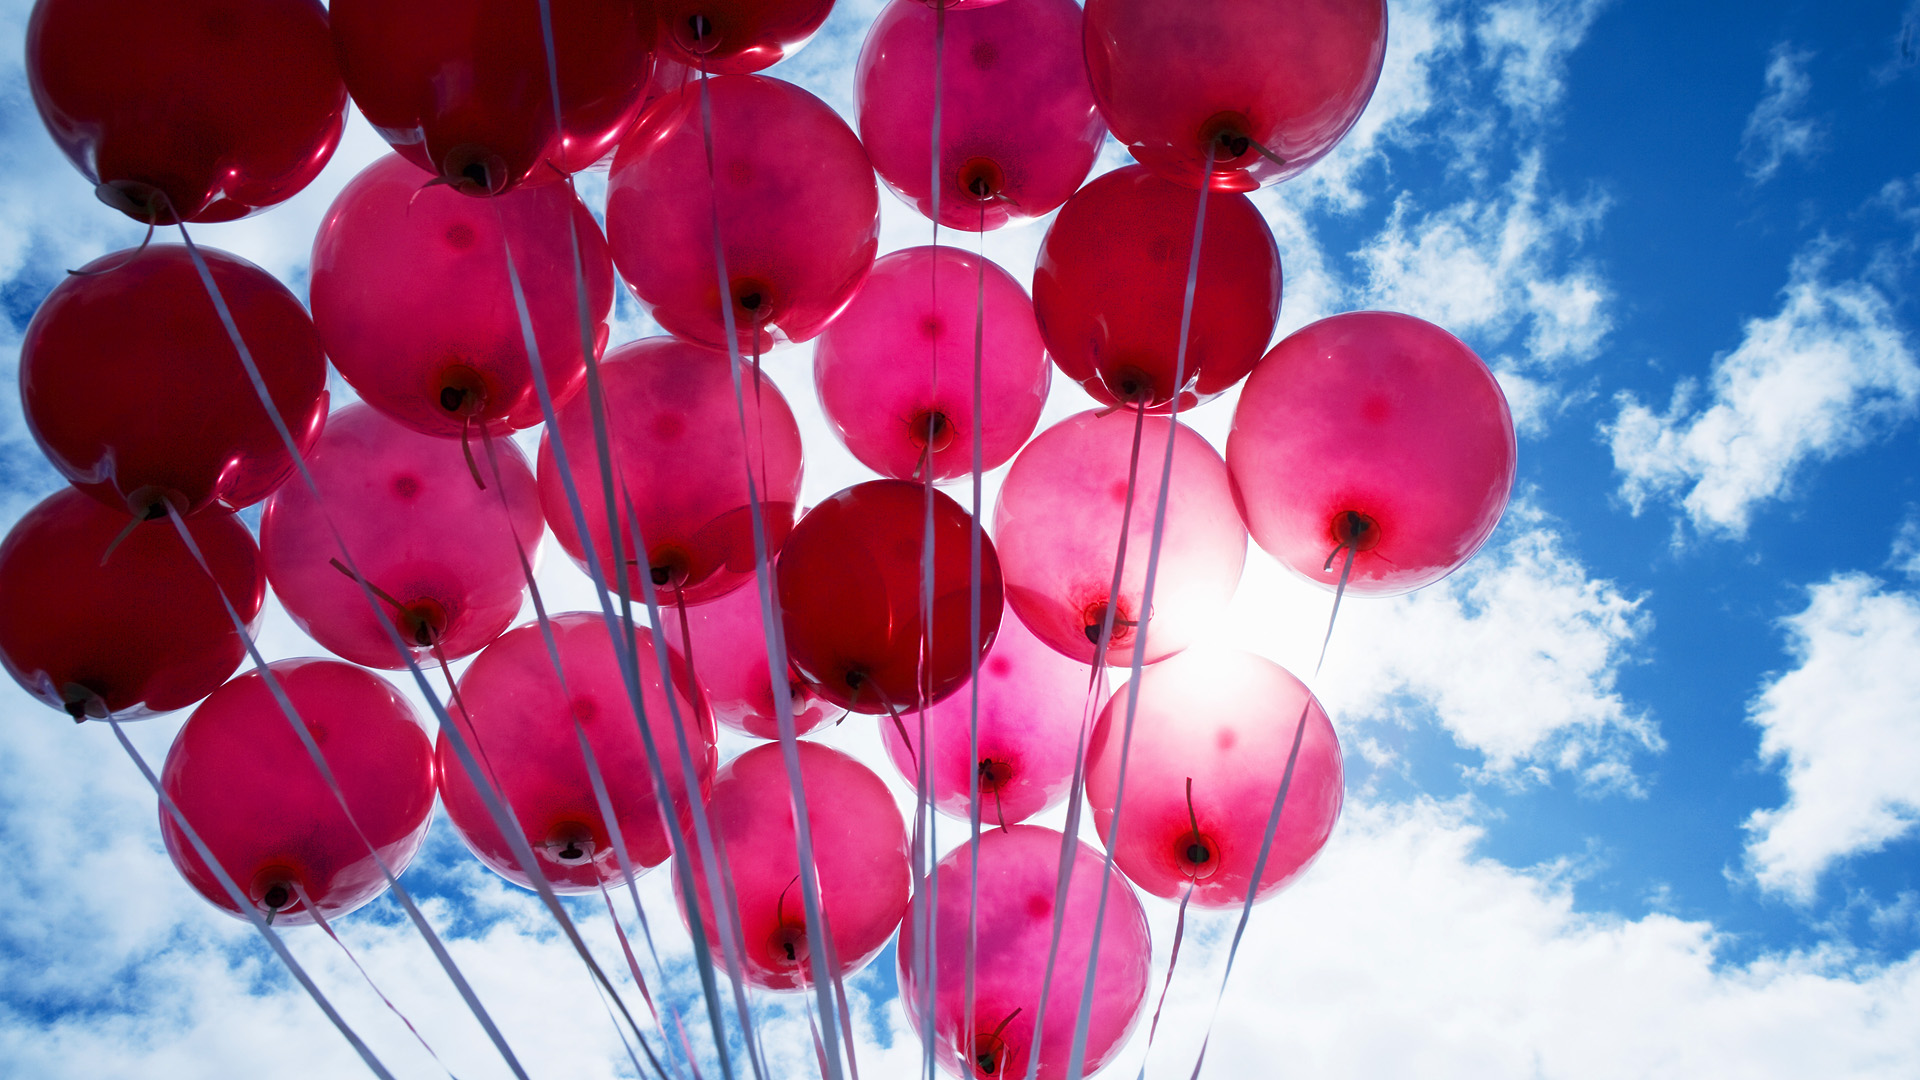 Red balloons against blue sky --- Image by © Karan Kapoor/cultura/Corbis